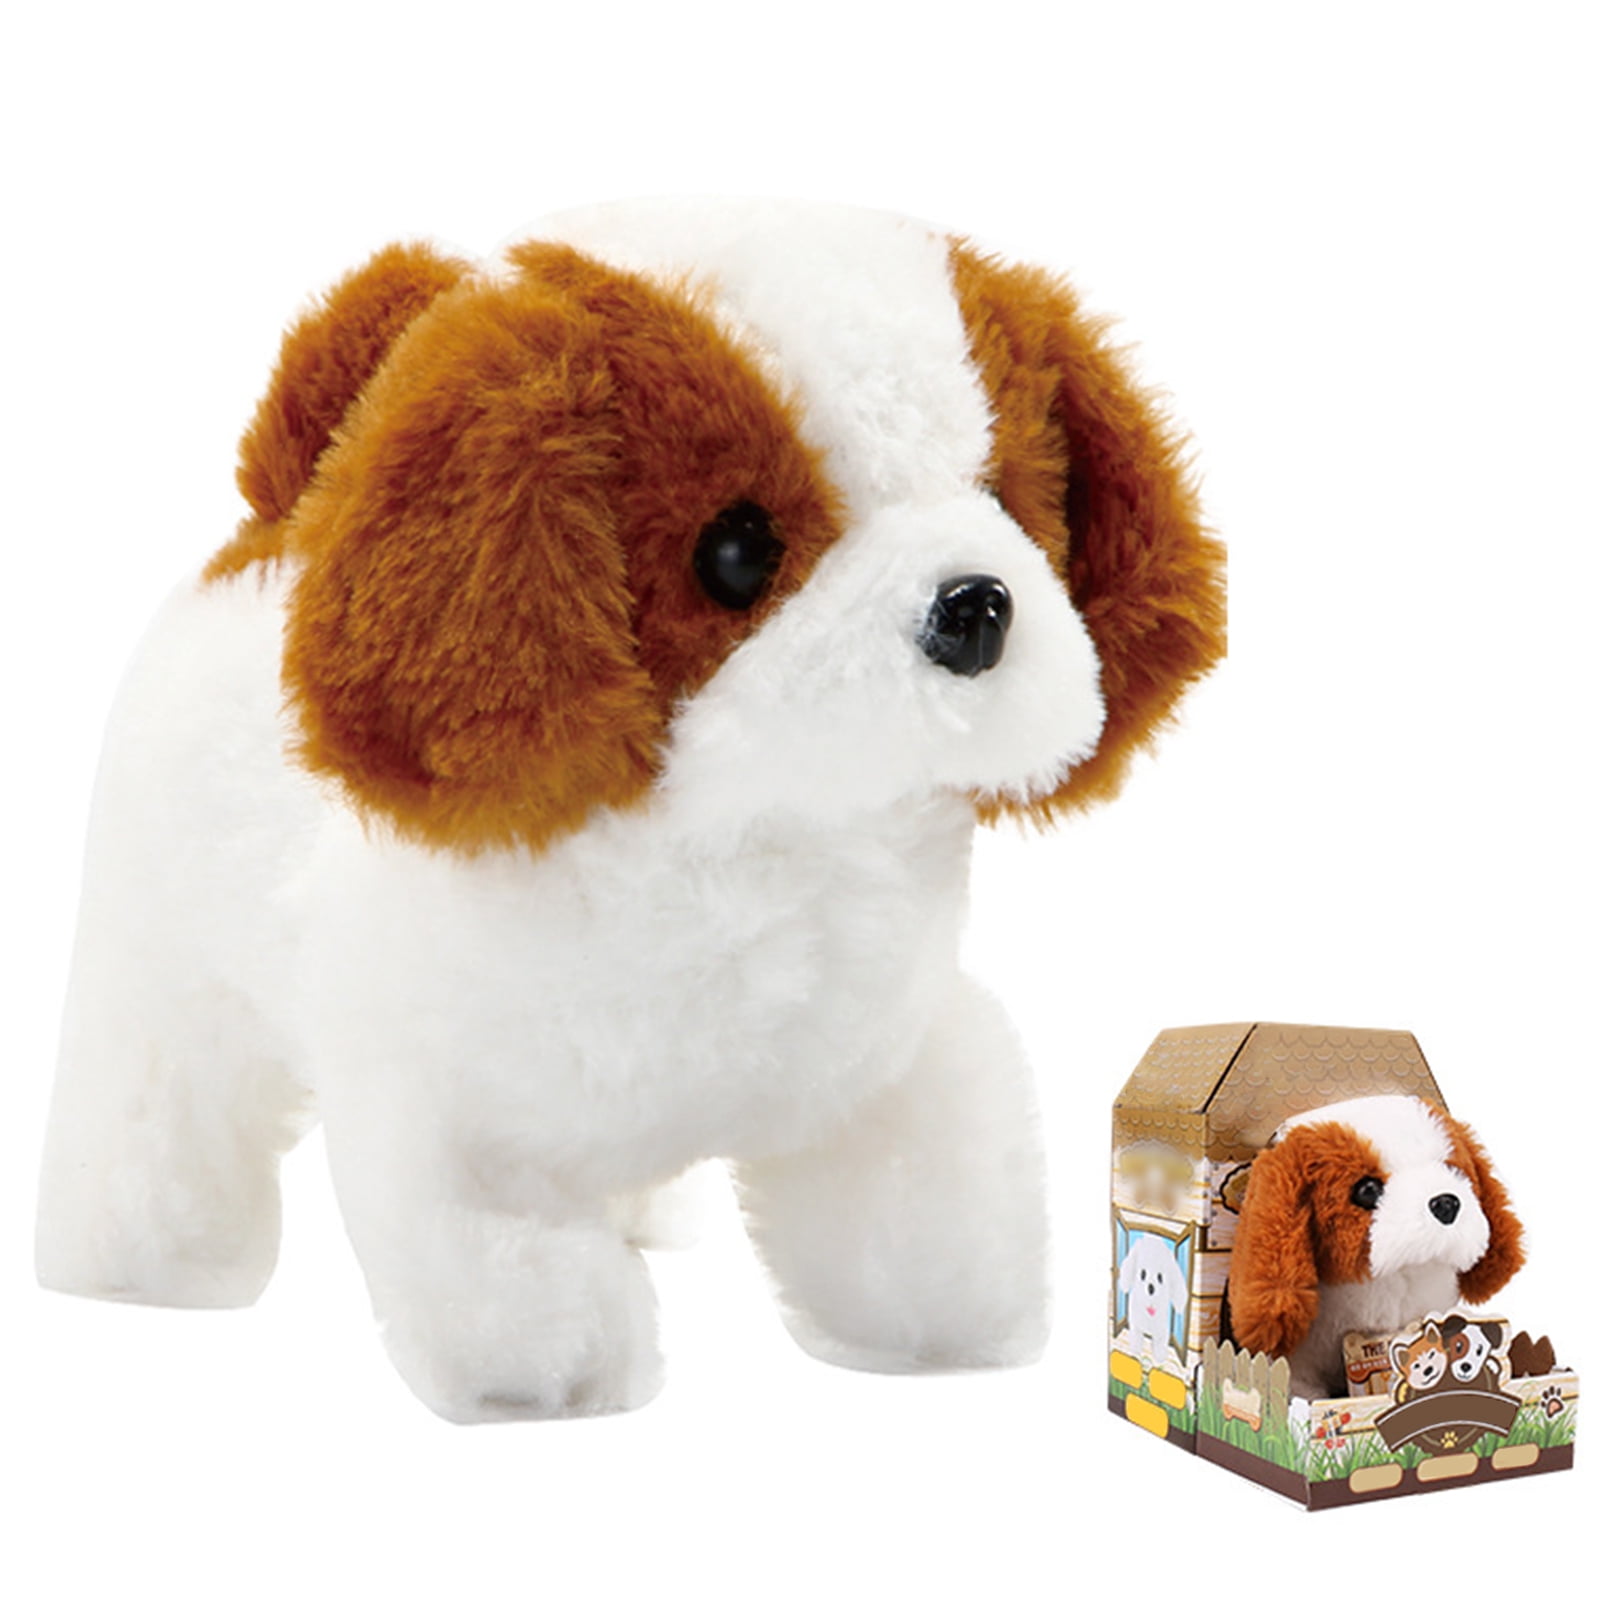 Walking Dog Toys,Barking Puppy Pet Dogs,Walking Barking,Wagging Tails,Interactive Toy Dogs For Kids,Cultivating Children To Love Animals Since Childhood,The Best Gift To Accompany Your Childs Growth 